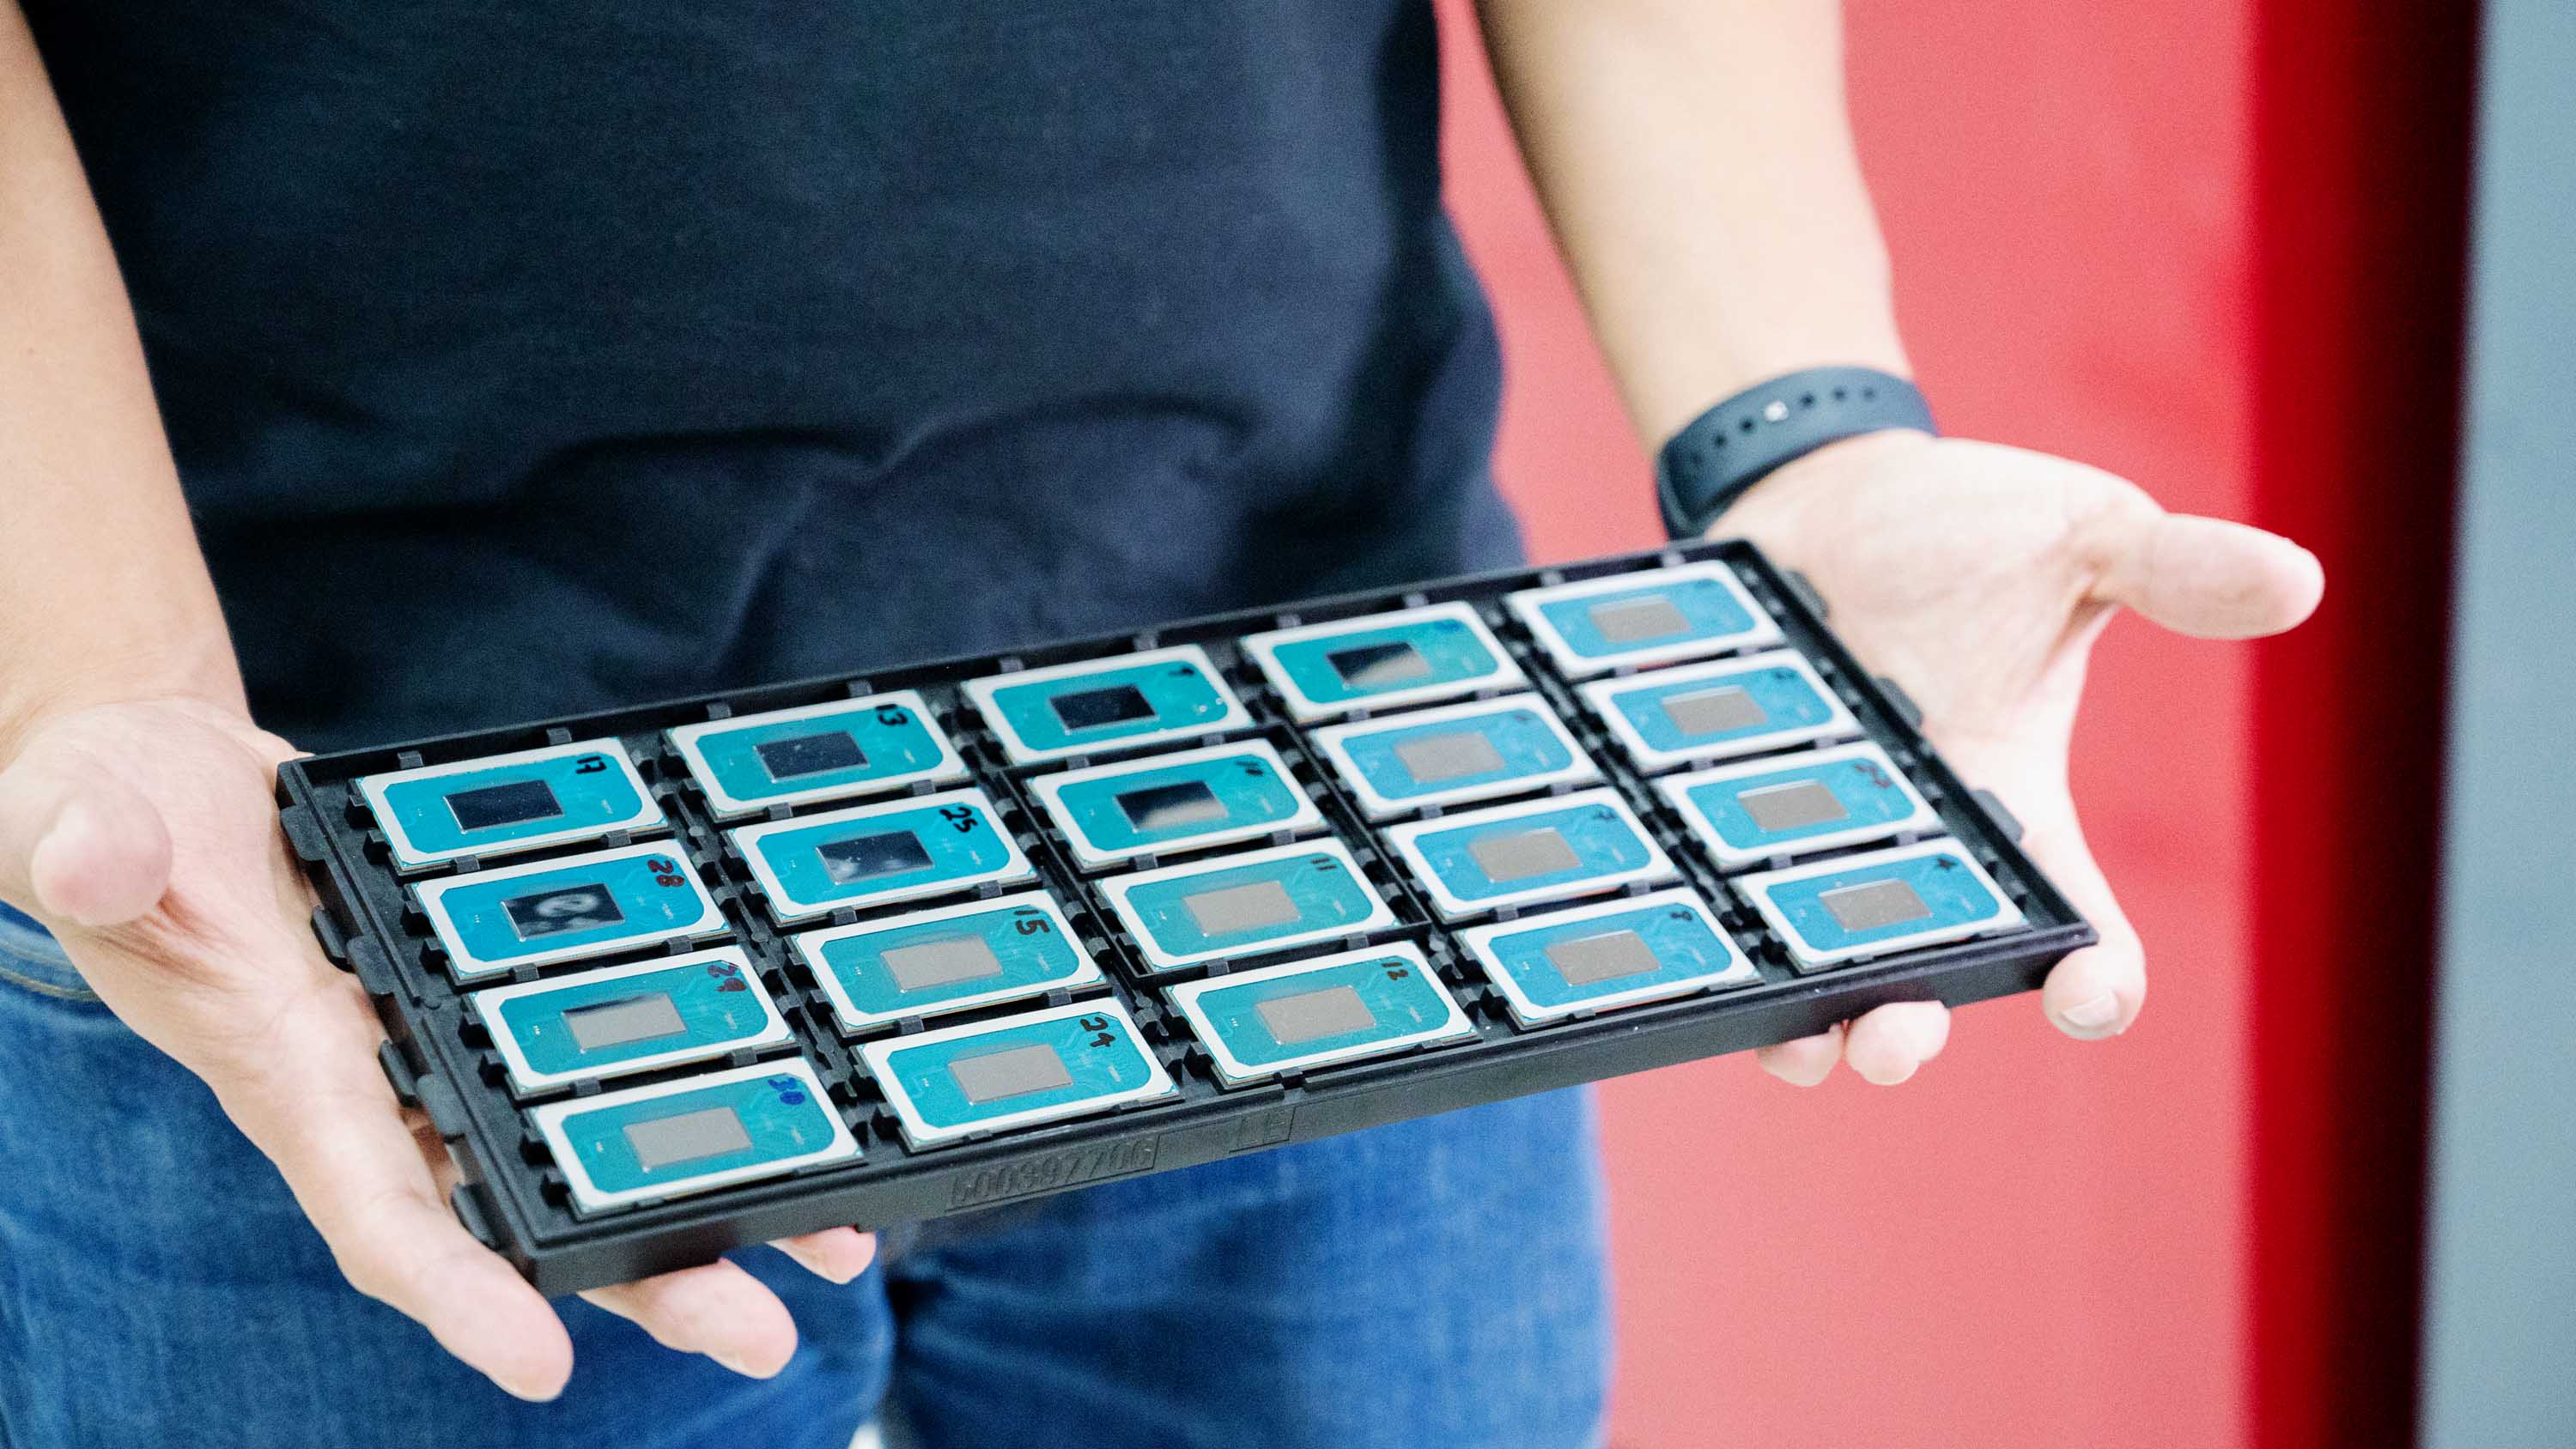 microsoft, windows, microsoft, intel's gambit: new core ultra mobile cpus take on apple and amd with ai chips, double the graphics power and ultra-efficient laptops. but will it work?